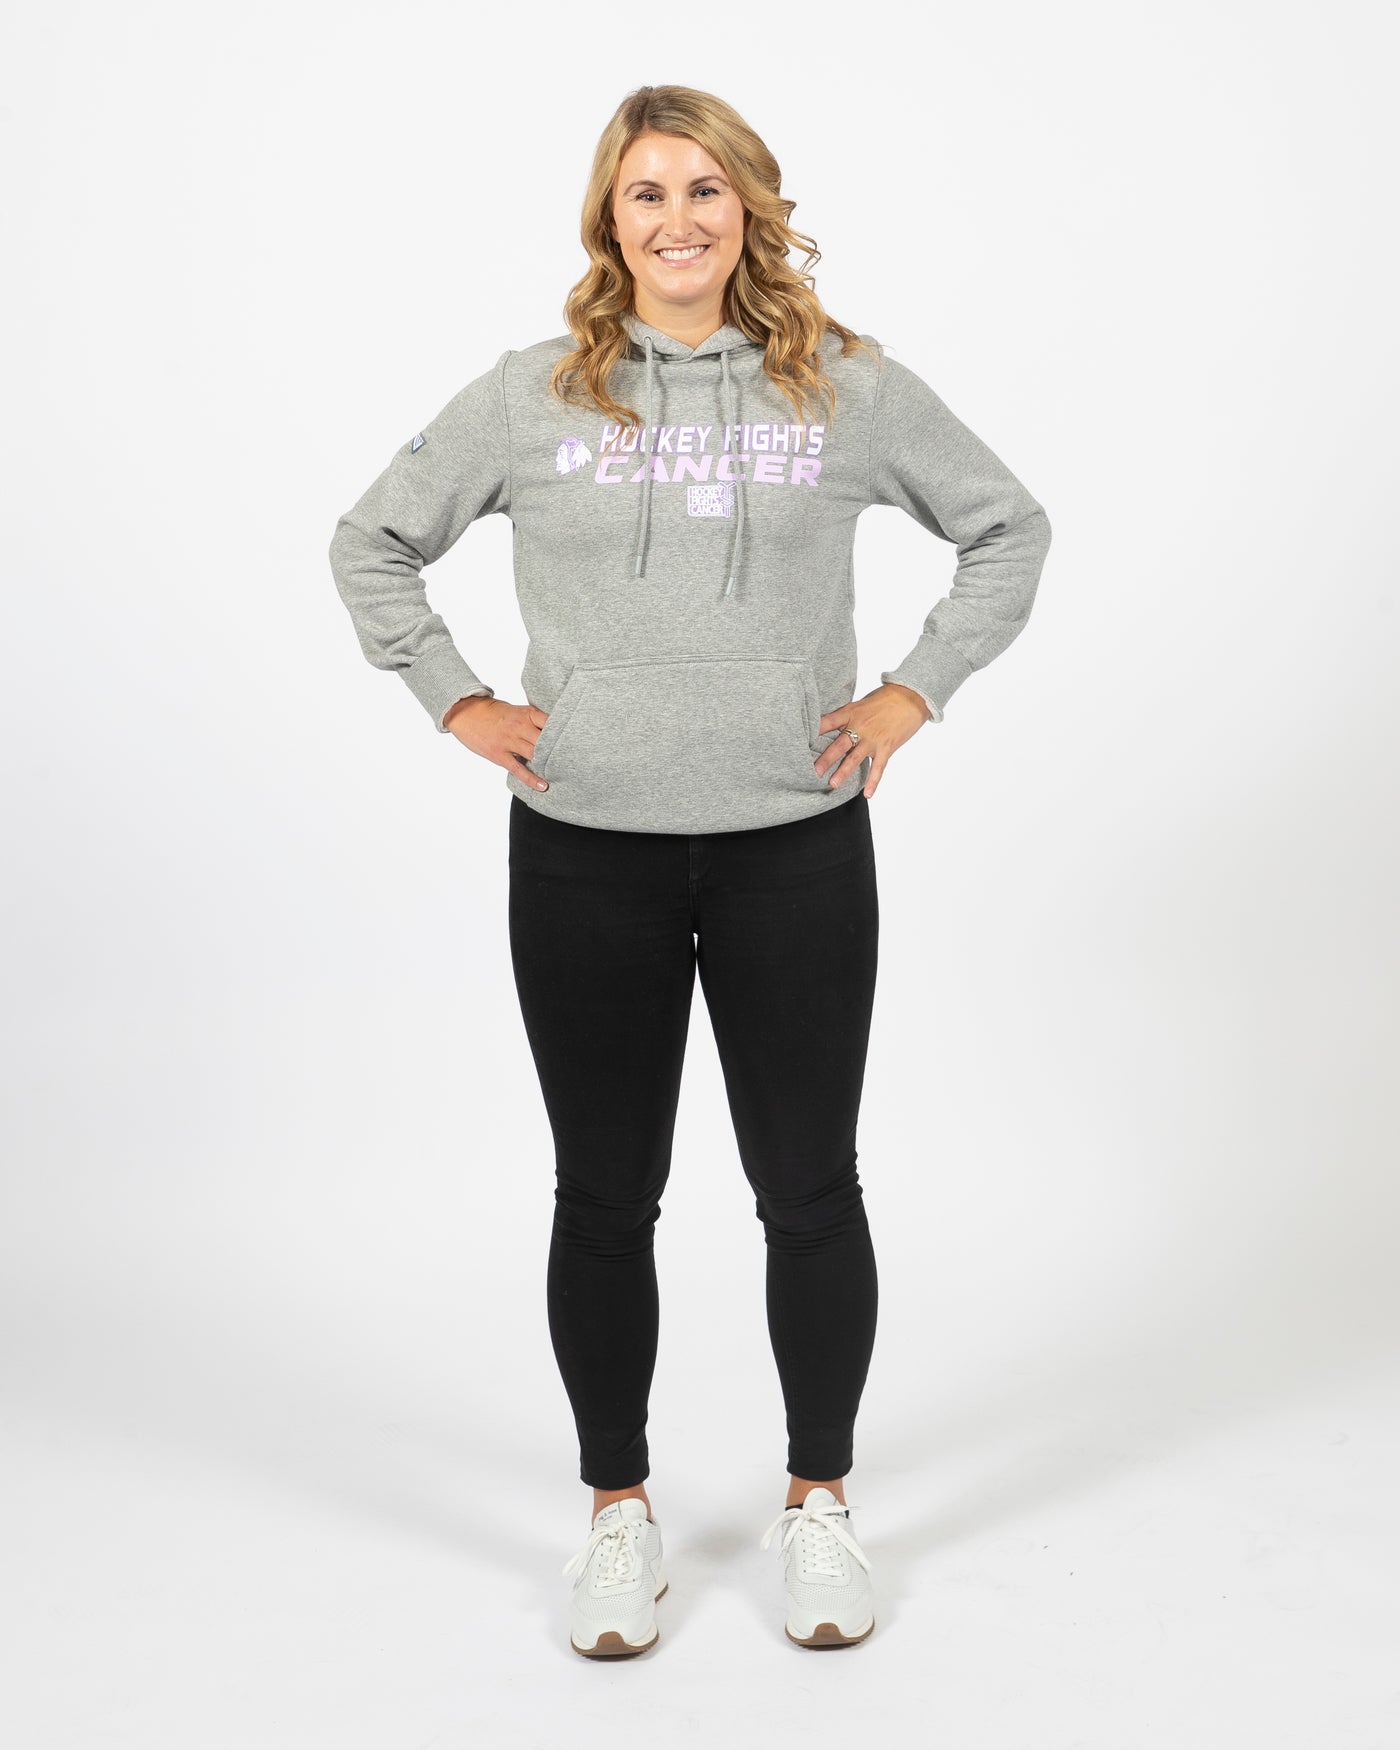 Hockey Fights Cancer Graphic Logo Hoodie